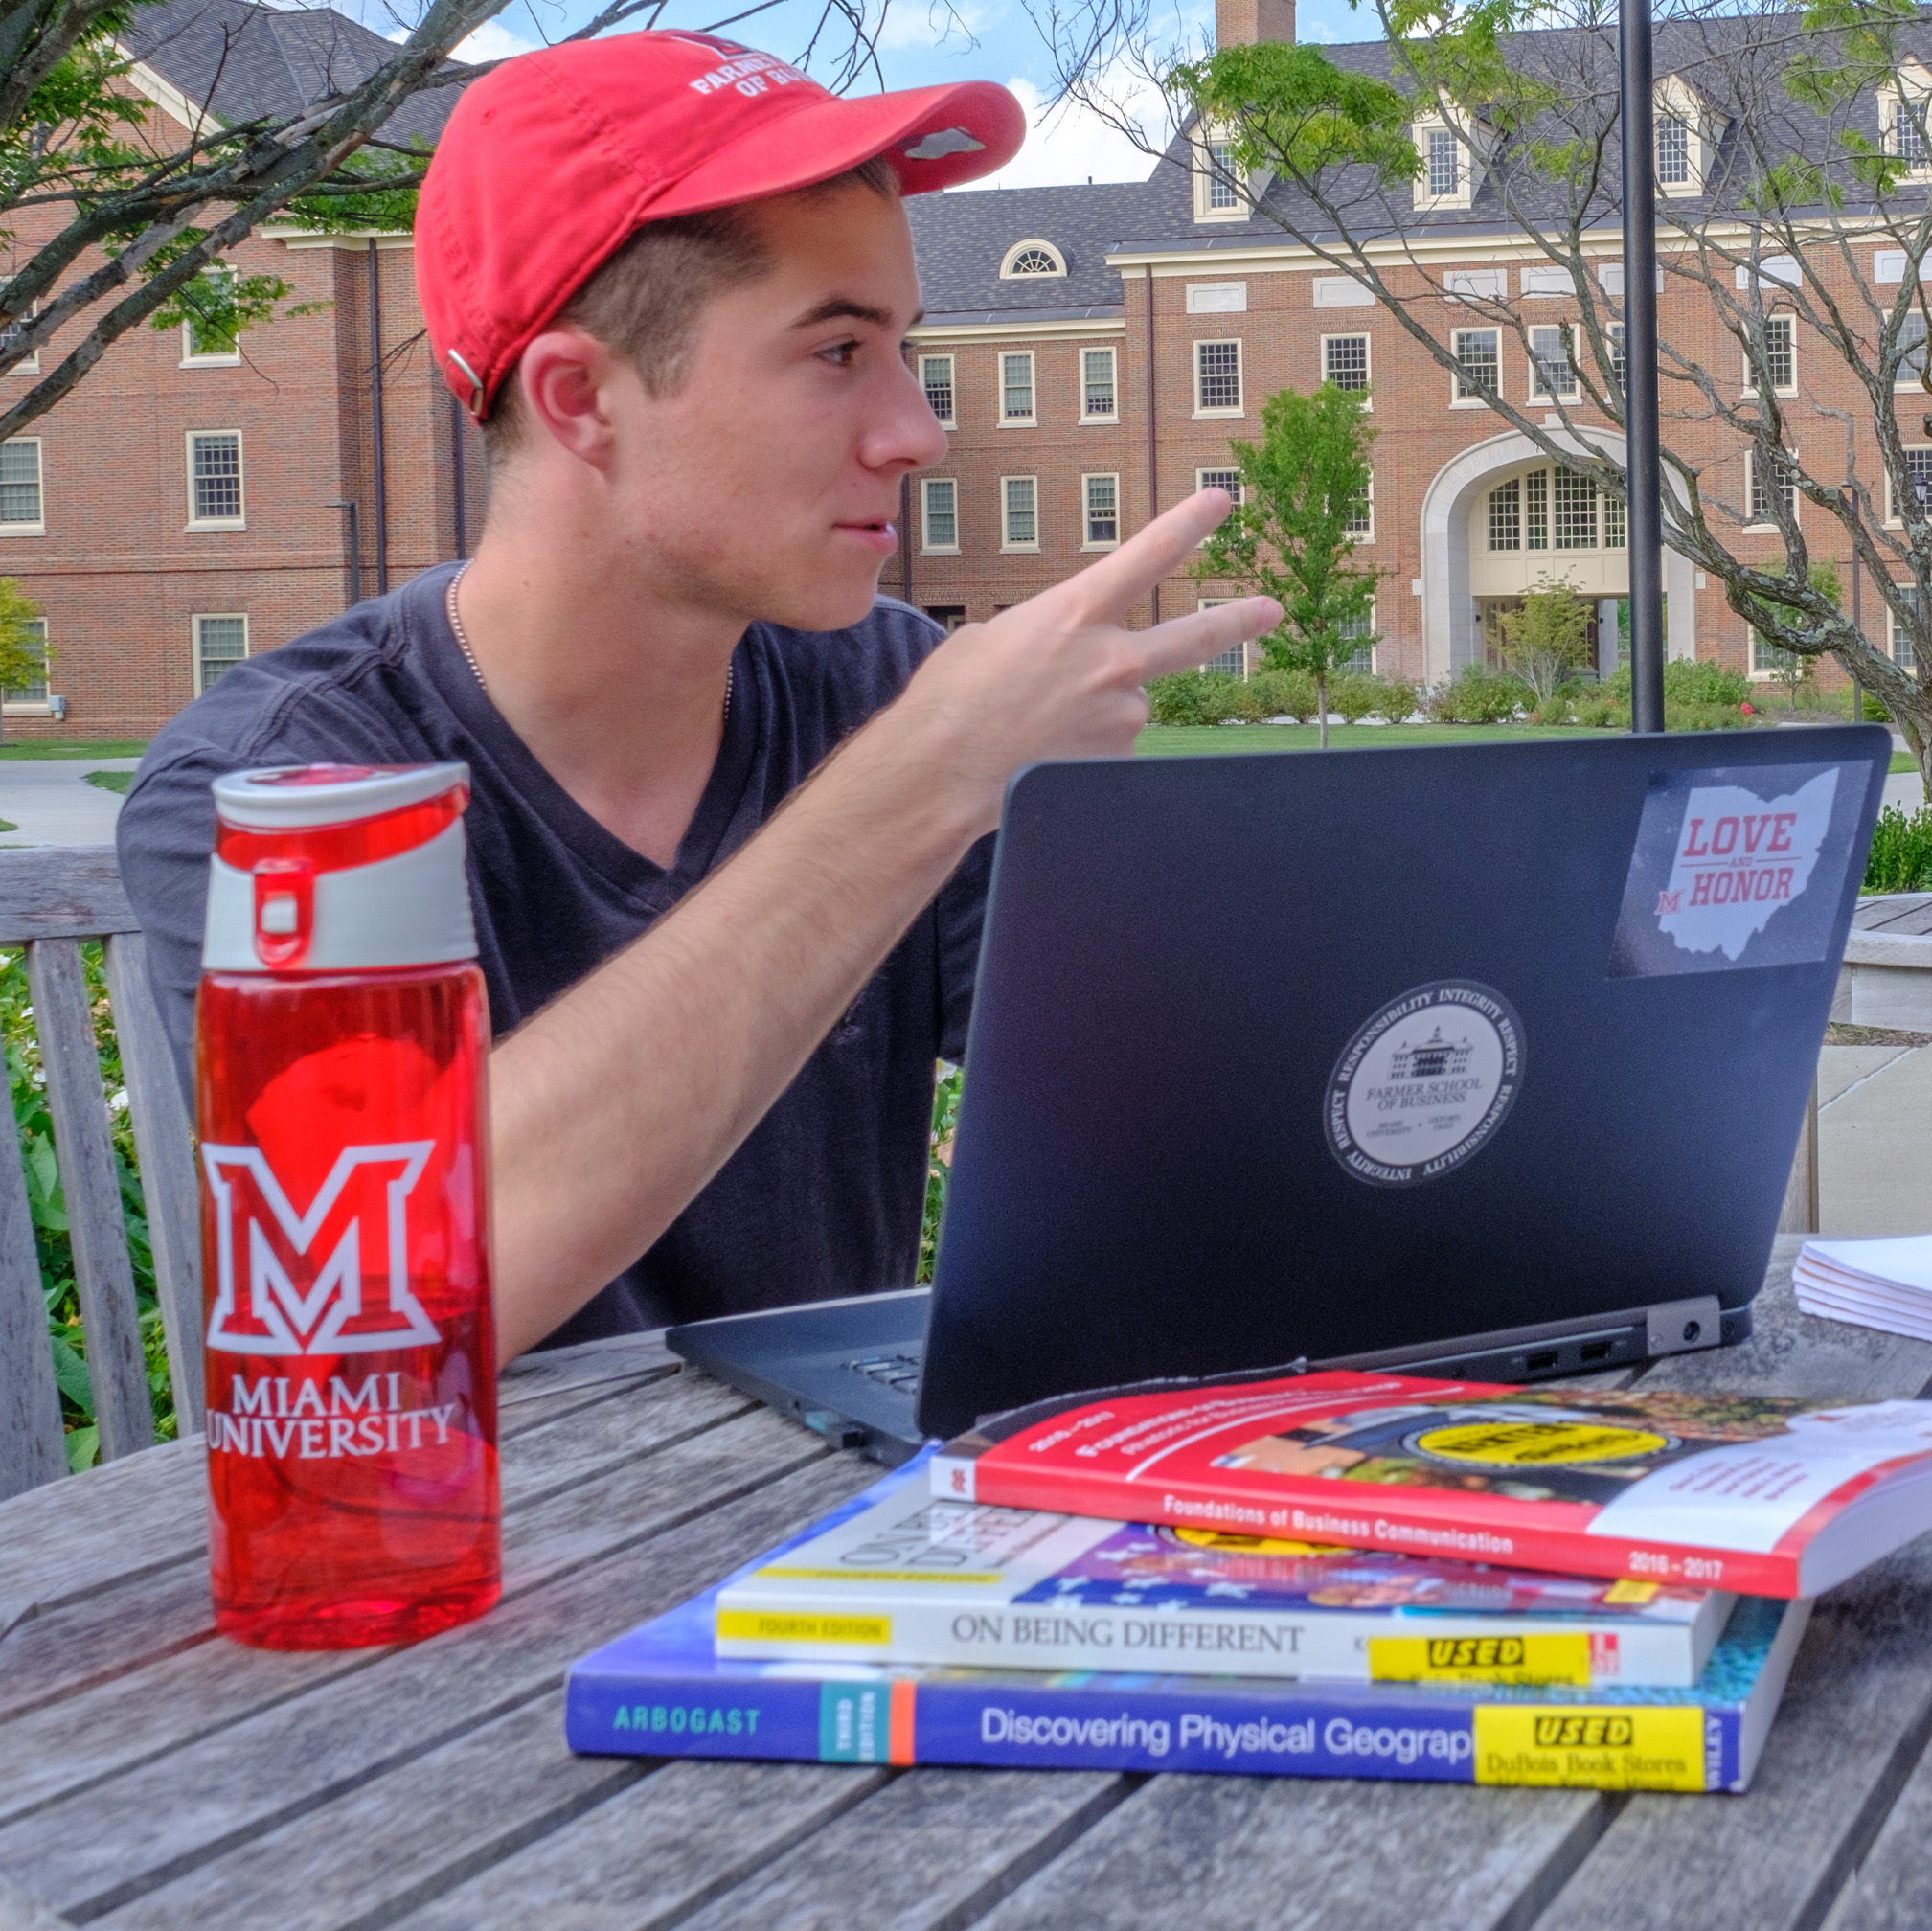 Male student with a red Miami hat is sitting outside at a table while working on his computer